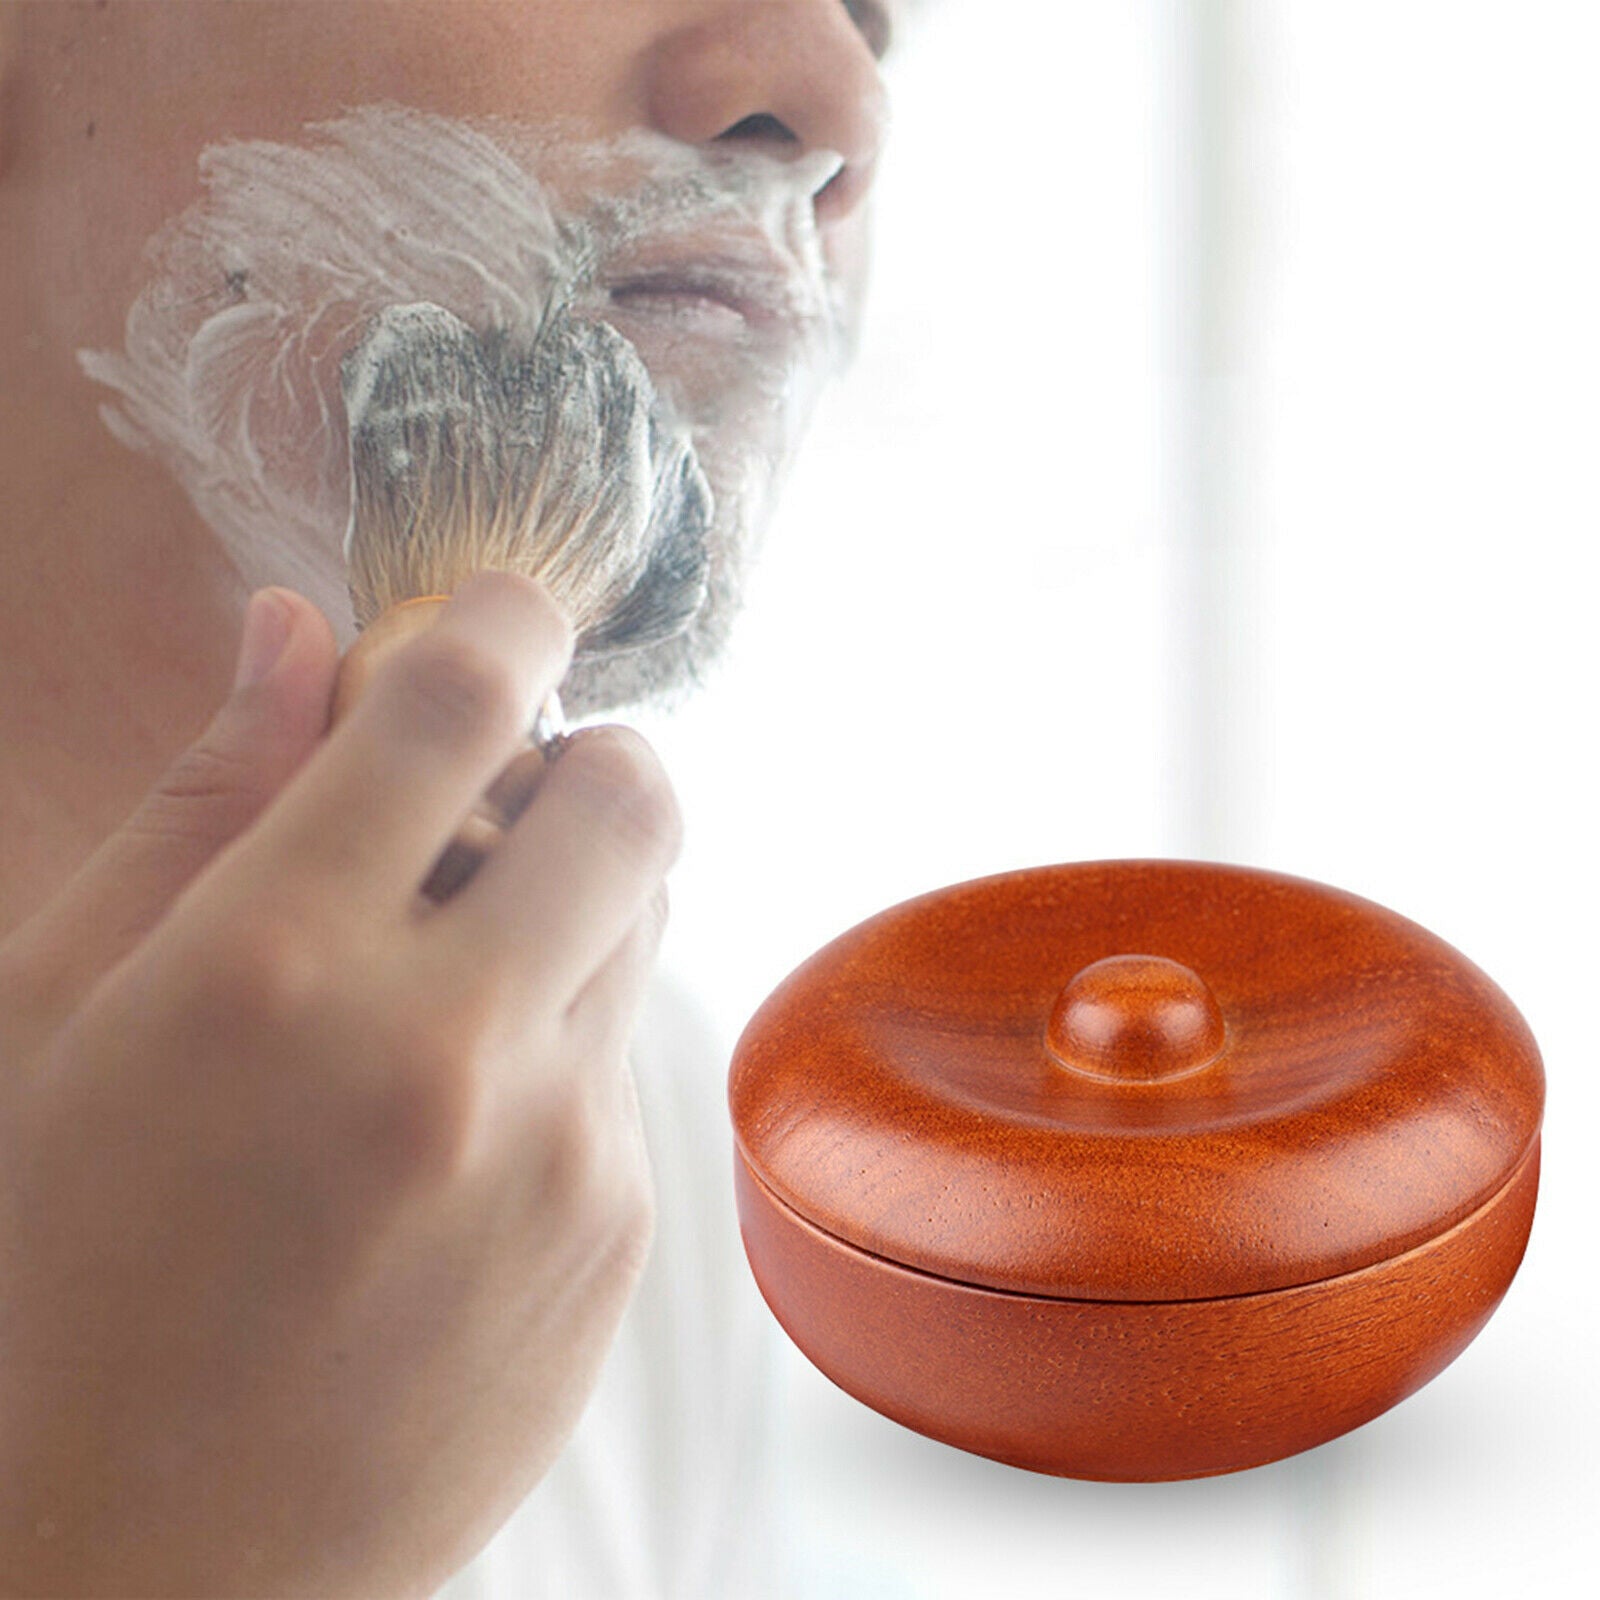 Wooden Shaving Soap Bowl Lathering Shave Soap Beard Care Face Cleaning